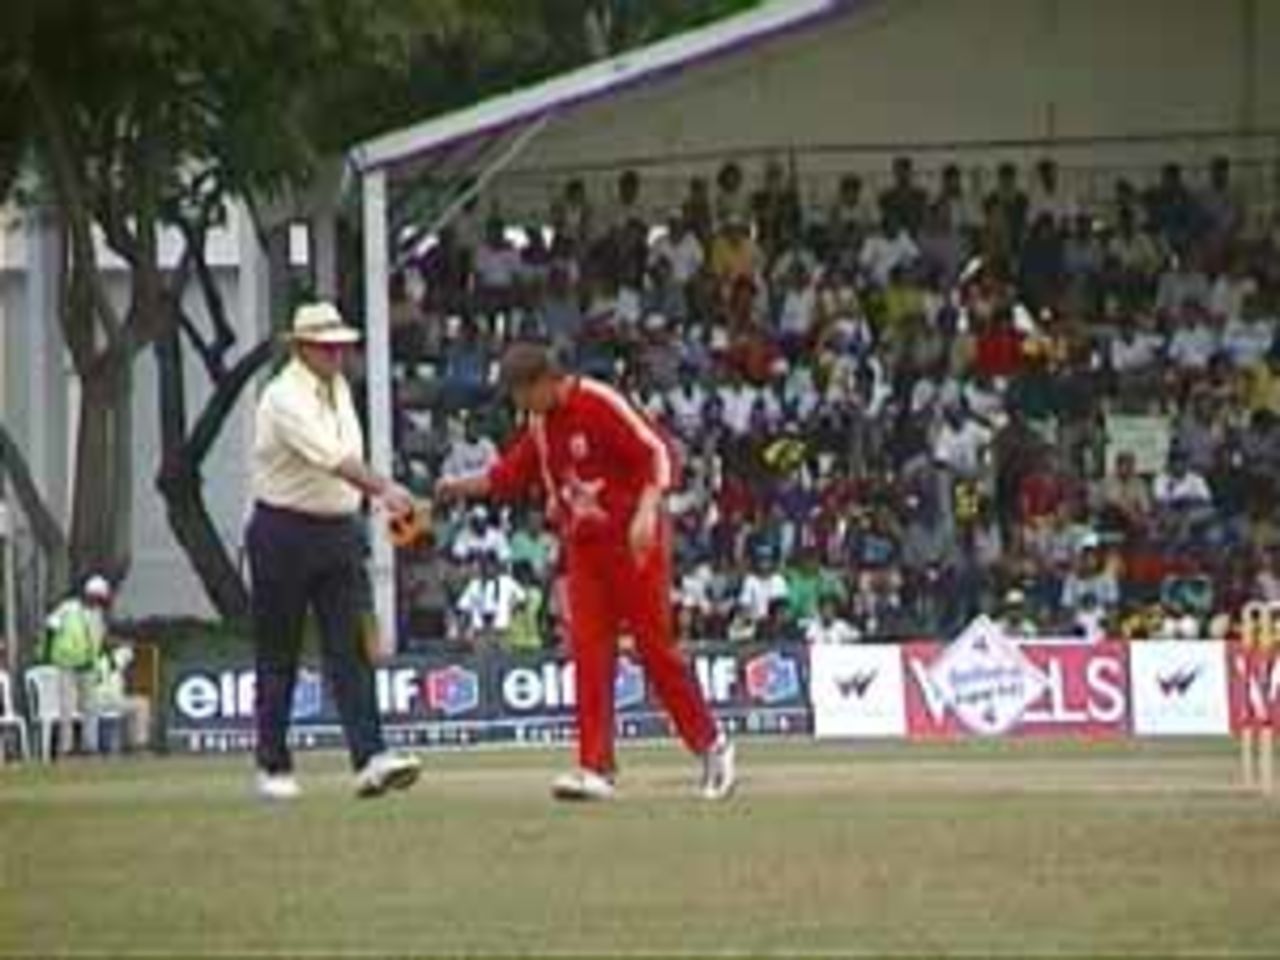 Hair hands over the cap to a much relieved Zimbabwean bowler, India v Zimbabwe (2nd ODI), Coca-Cola Singapore Challenge, 1999-2000, Kallang Ground, Singapore, 4 Sep 1999.